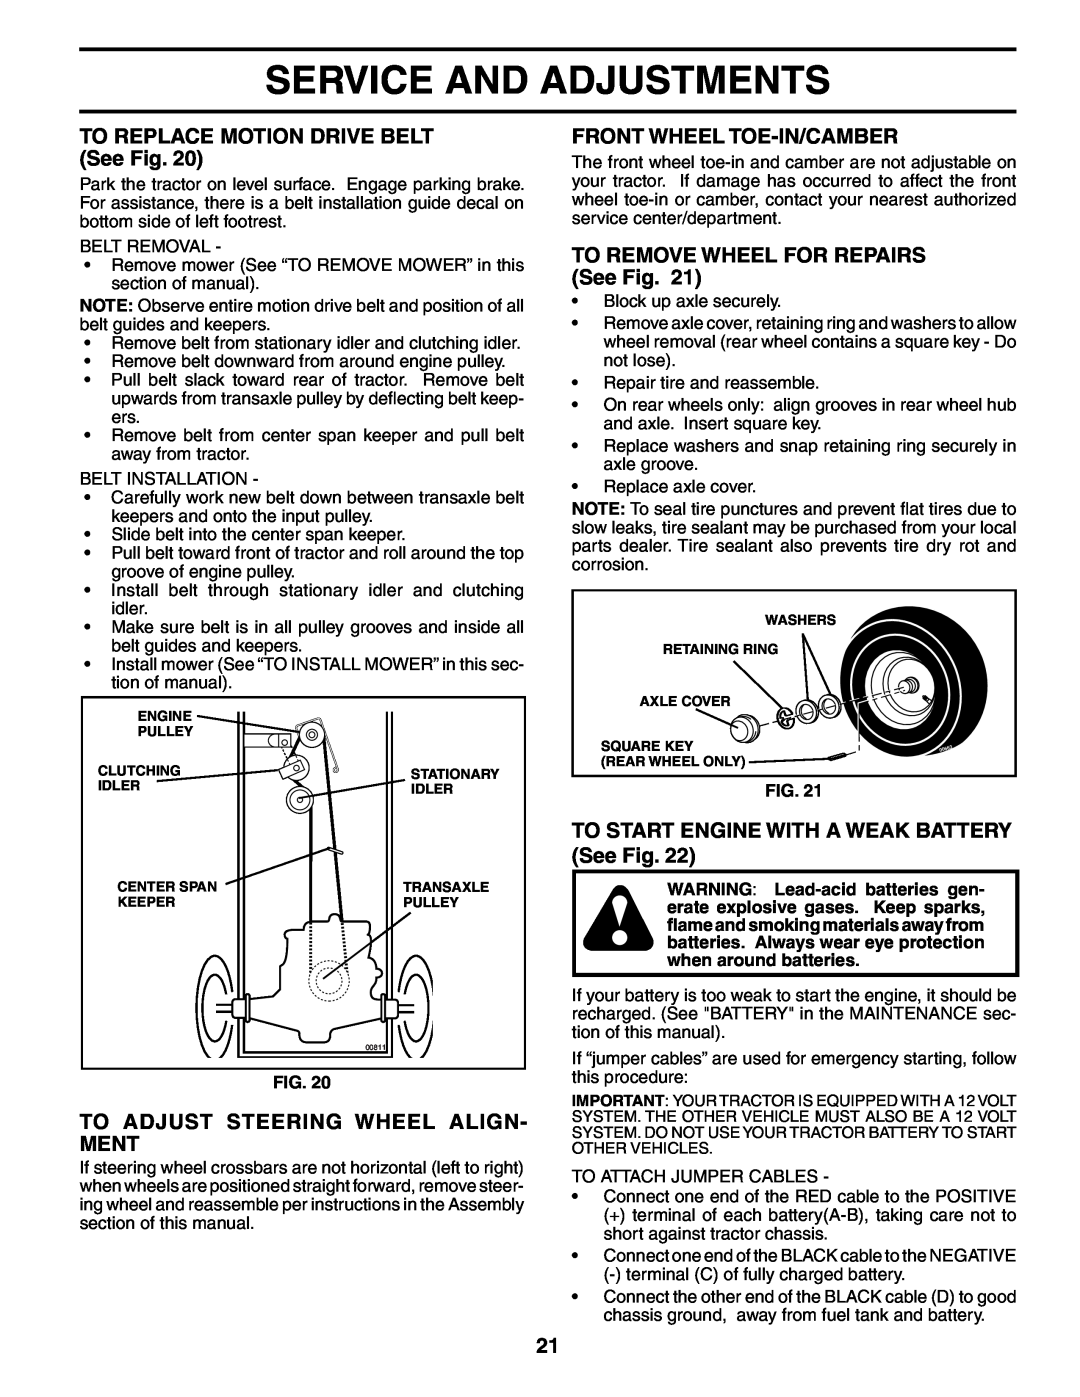 Poulan 188695 manual TO REPLACE MOTION DRIVE BELT See Fig, Front Wheel Toe-In/Camber, TO REMOVE WHEEL FOR REPAIRS See Fig 